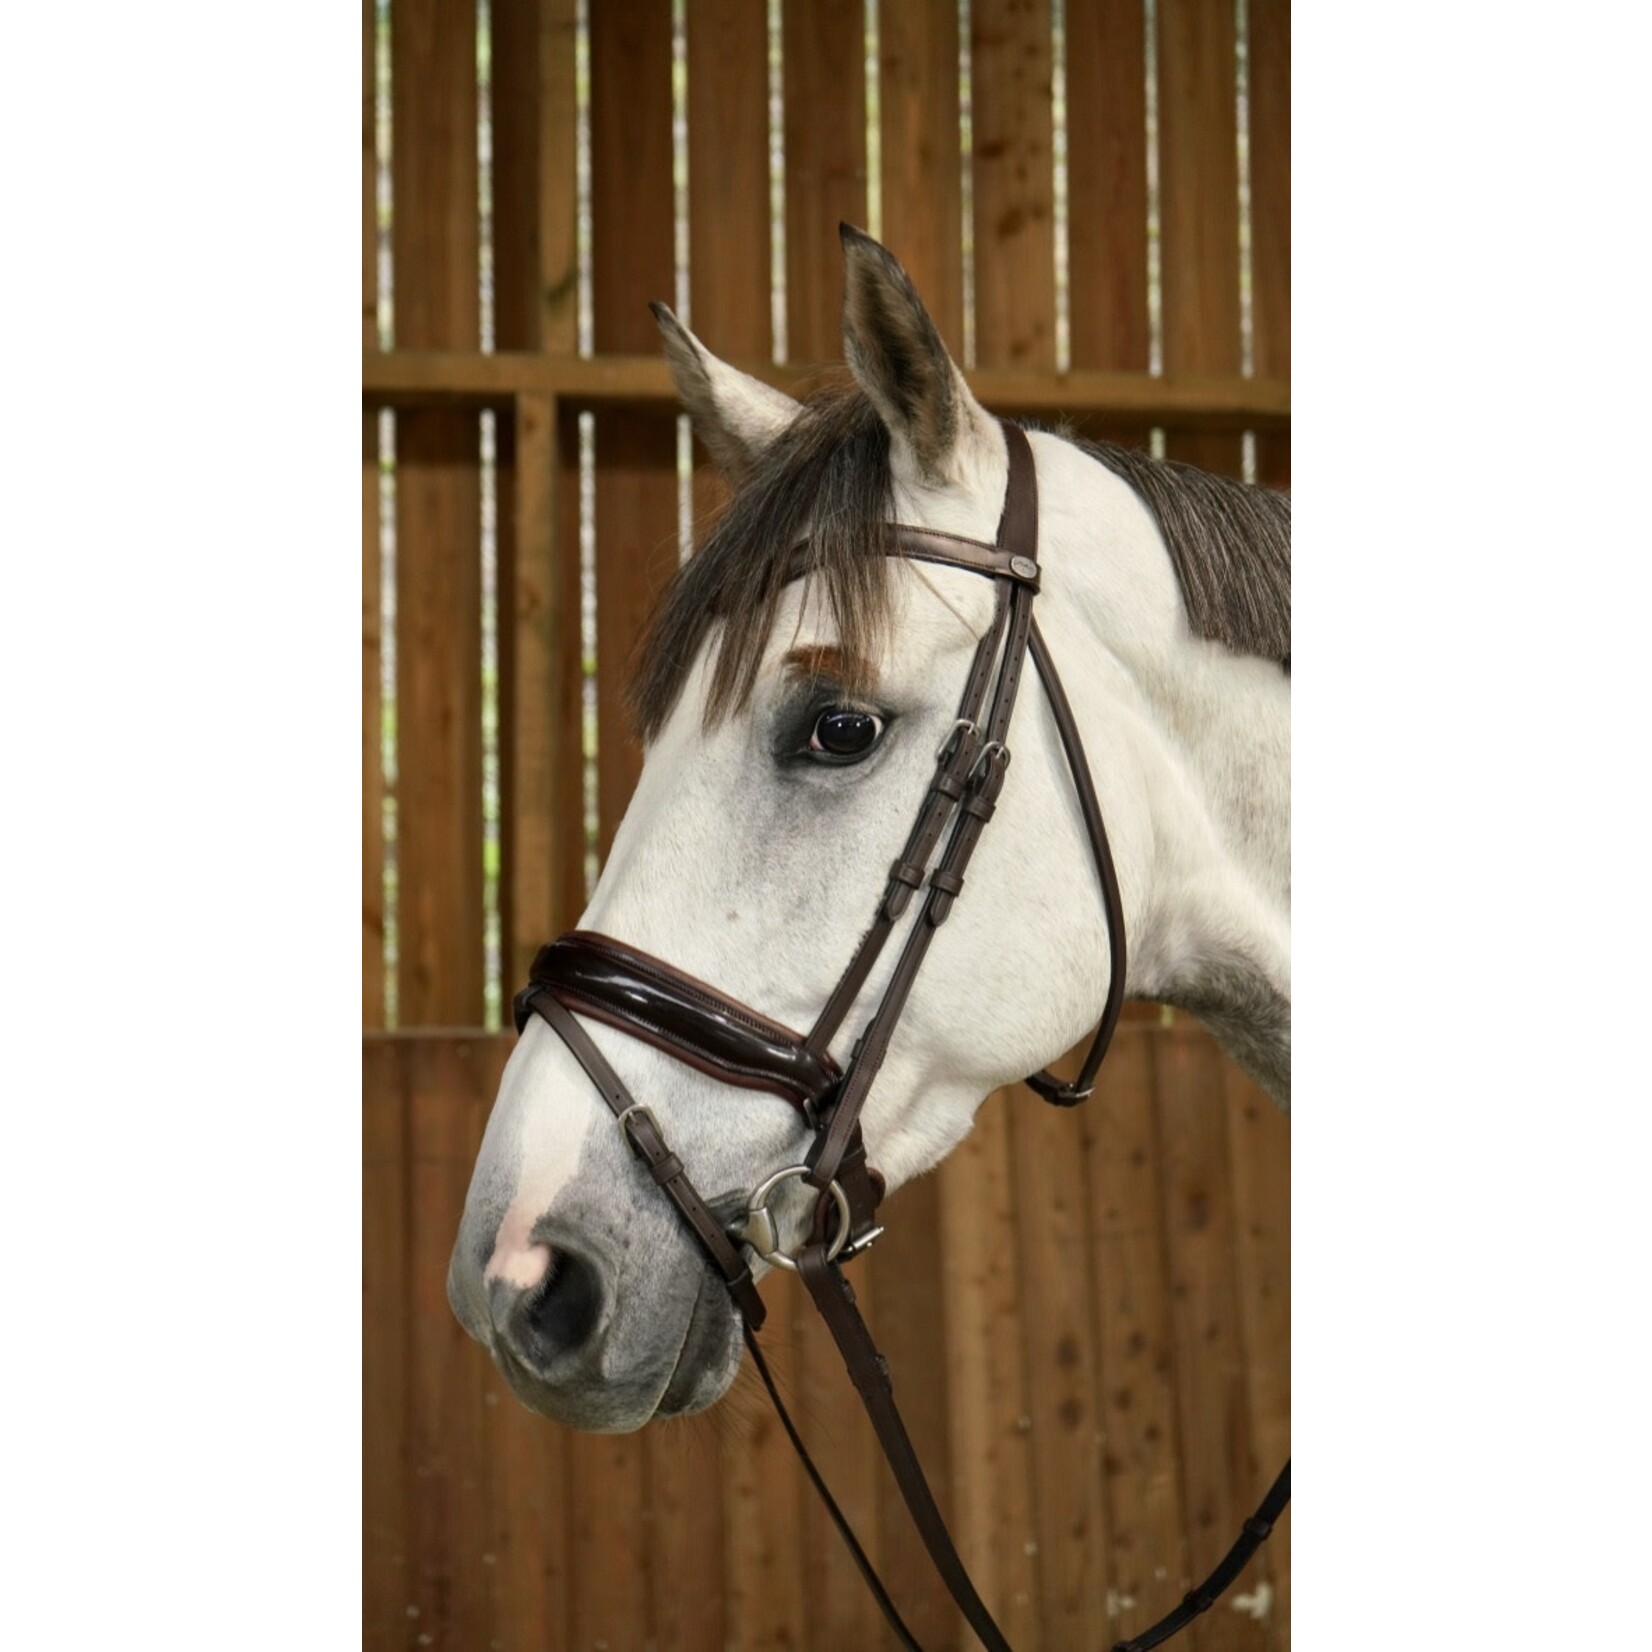 Dy'on WODCAM Dy'on Flat Leather Dressage Snaffle Bridle -Large crank flash noseband bridle, black padding. Reins sold separately.